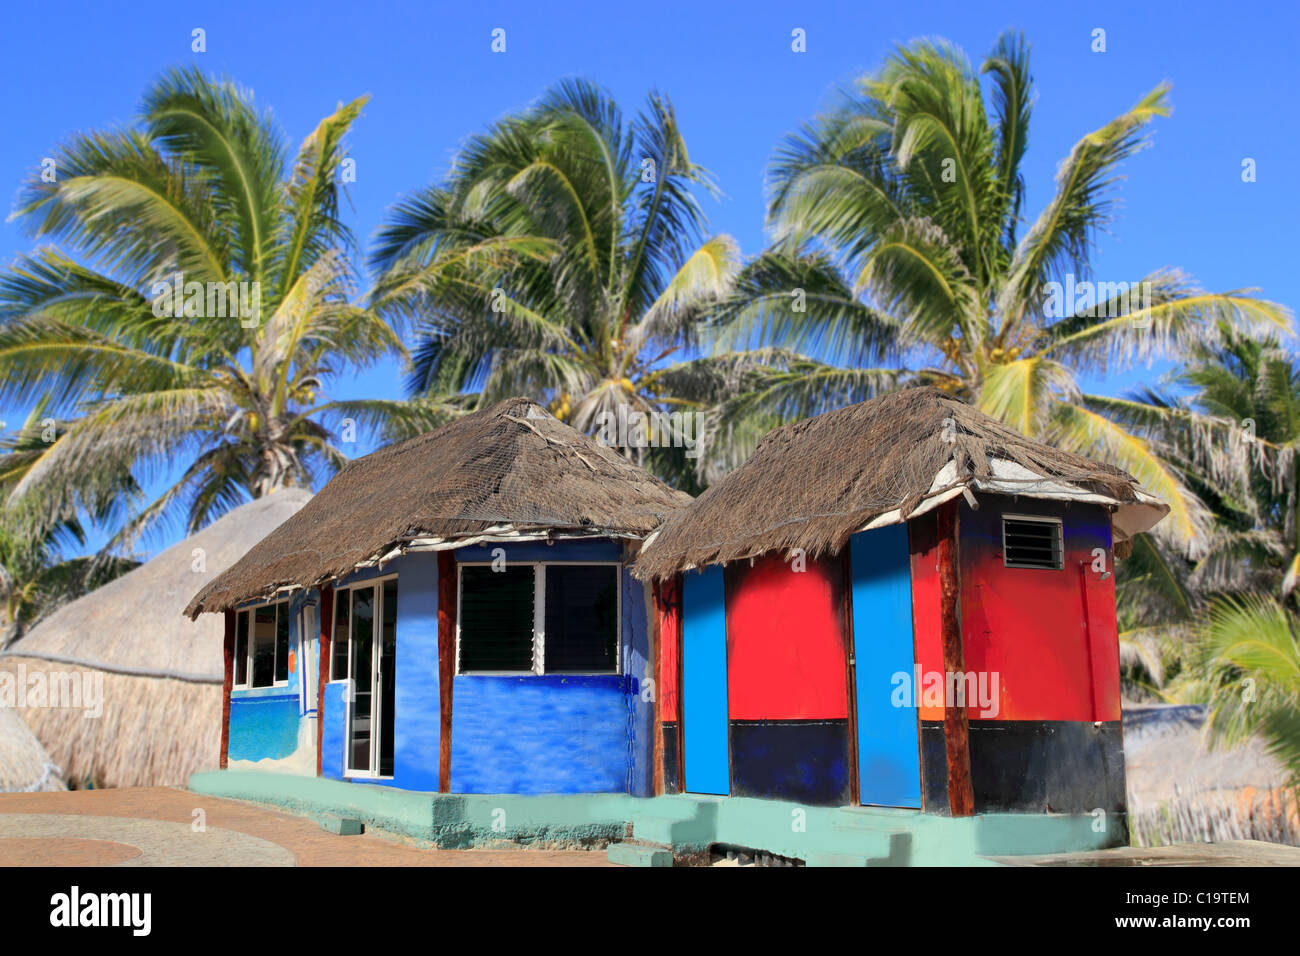 hut palapa colorful with tropical cabin and palm trees Stock Photo